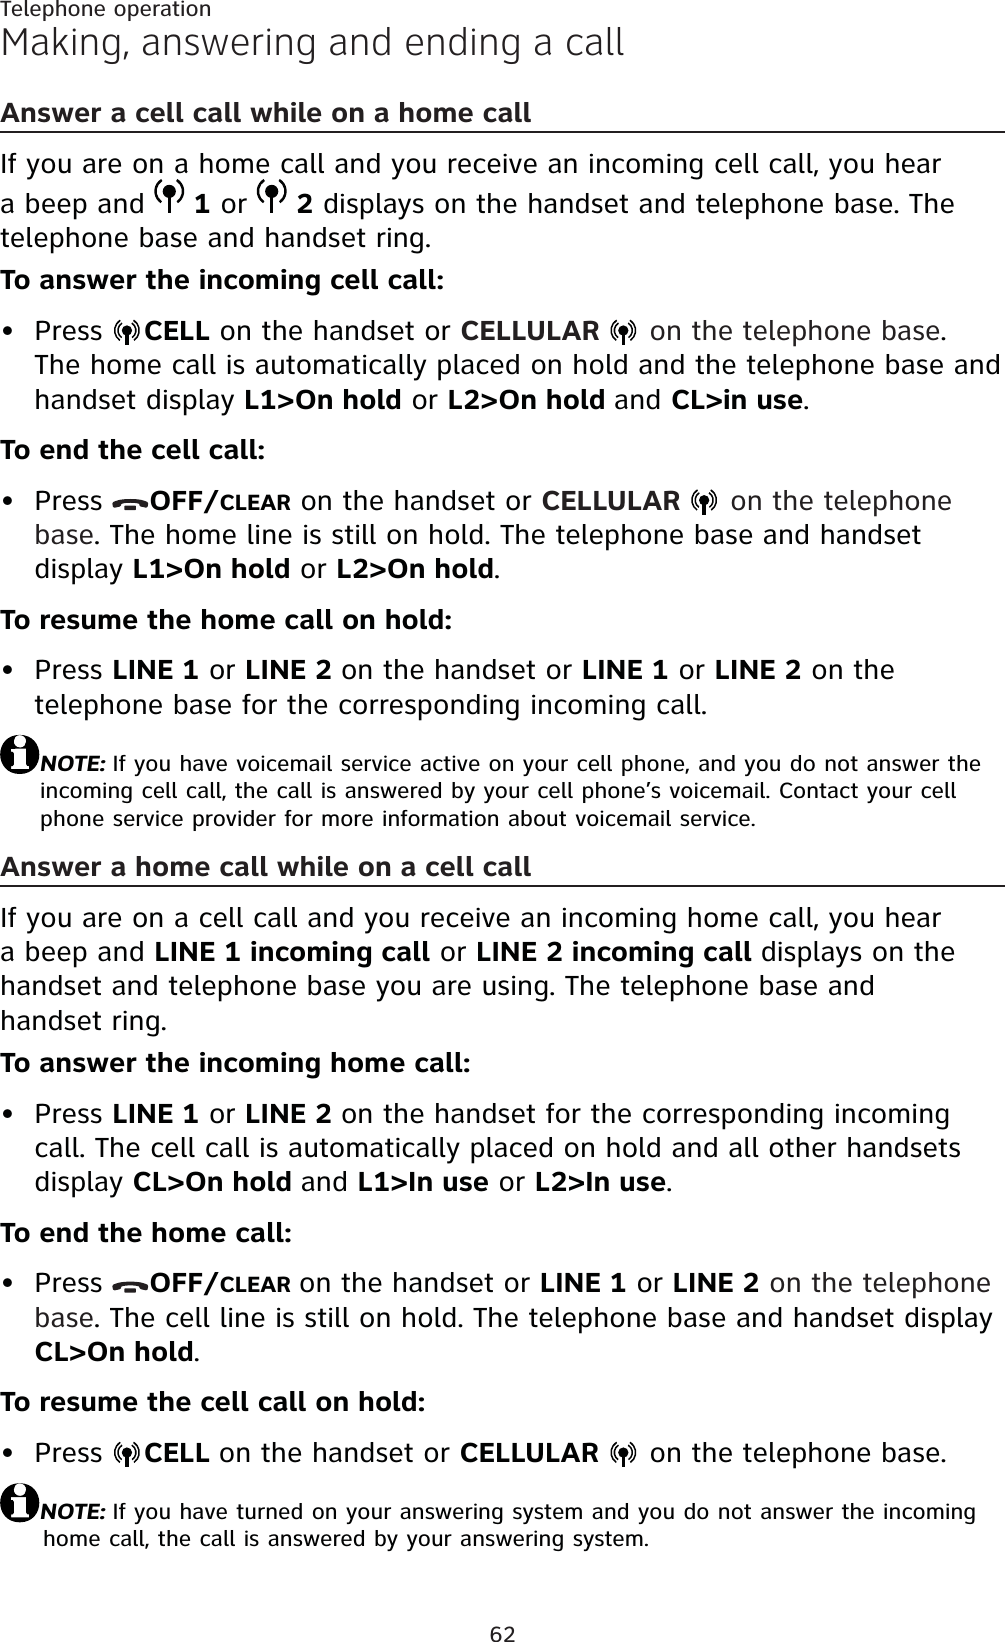 62Telephone operationMaking, answering and ending a callAnswer a cell call while on a home callIf you are on a home call and you receive an incoming cell call, you hear a beep and  1 or  2 displays on the handset and telephone base. The telephone base and handset ring.To answer the incoming cell call:Press  CELL on the handset or CELLULAR   on the telephone base.The home call is automatically placed on hold and the telephone base and  handset display L1&gt;On hold or L2&gt;On hold and CL&gt;in use.To end the cell call:Press  OFF/CLEAR on the handset or CELLULAR   on the telephone base. The home line is still on hold. The telephone base and handset display L1&gt;On hold or L2&gt;On hold.To resume the home call on hold:Press LINE 1 or LINE 2 on the handset or LINE 1 or LINE 2 on the telephone base for the corresponding incoming call.NOTE: If you have voicemail service active on your cell phone, and you do not answer the incoming cell call, the call is answered by your cell phone’s voicemail. Contact your cell phone service provider for more information about voicemail service.Answer a home call while on a cell callIf you are on a cell call and you receive an incoming home call, you hear a beep and LINE 1 incoming call or LINE 2 incoming call displays on the handset and telephone base you are using. The telephone base and handset ring.To answer the incoming home call:Press LINE 1 or LINE 2 on the handset for the corresponding incoming call. The cell call is automatically placed on hold and all other handsets display CL&gt;On hold and L1&gt;In use or L2&gt;In use.To end the home call:Press  OFF/CLEAR on the handset or LINE 1 or LINE 2 on the telephone base. The cell line is still on hold. The telephone base and handset display CL&gt;On hold.To resume the cell call on hold:Press  CELL on the handset or CELLULAR  on the telephone base.NOTE: If you have turned on your answering system and you do not answer the incoming home call, the call is answered by your answering system.••••••